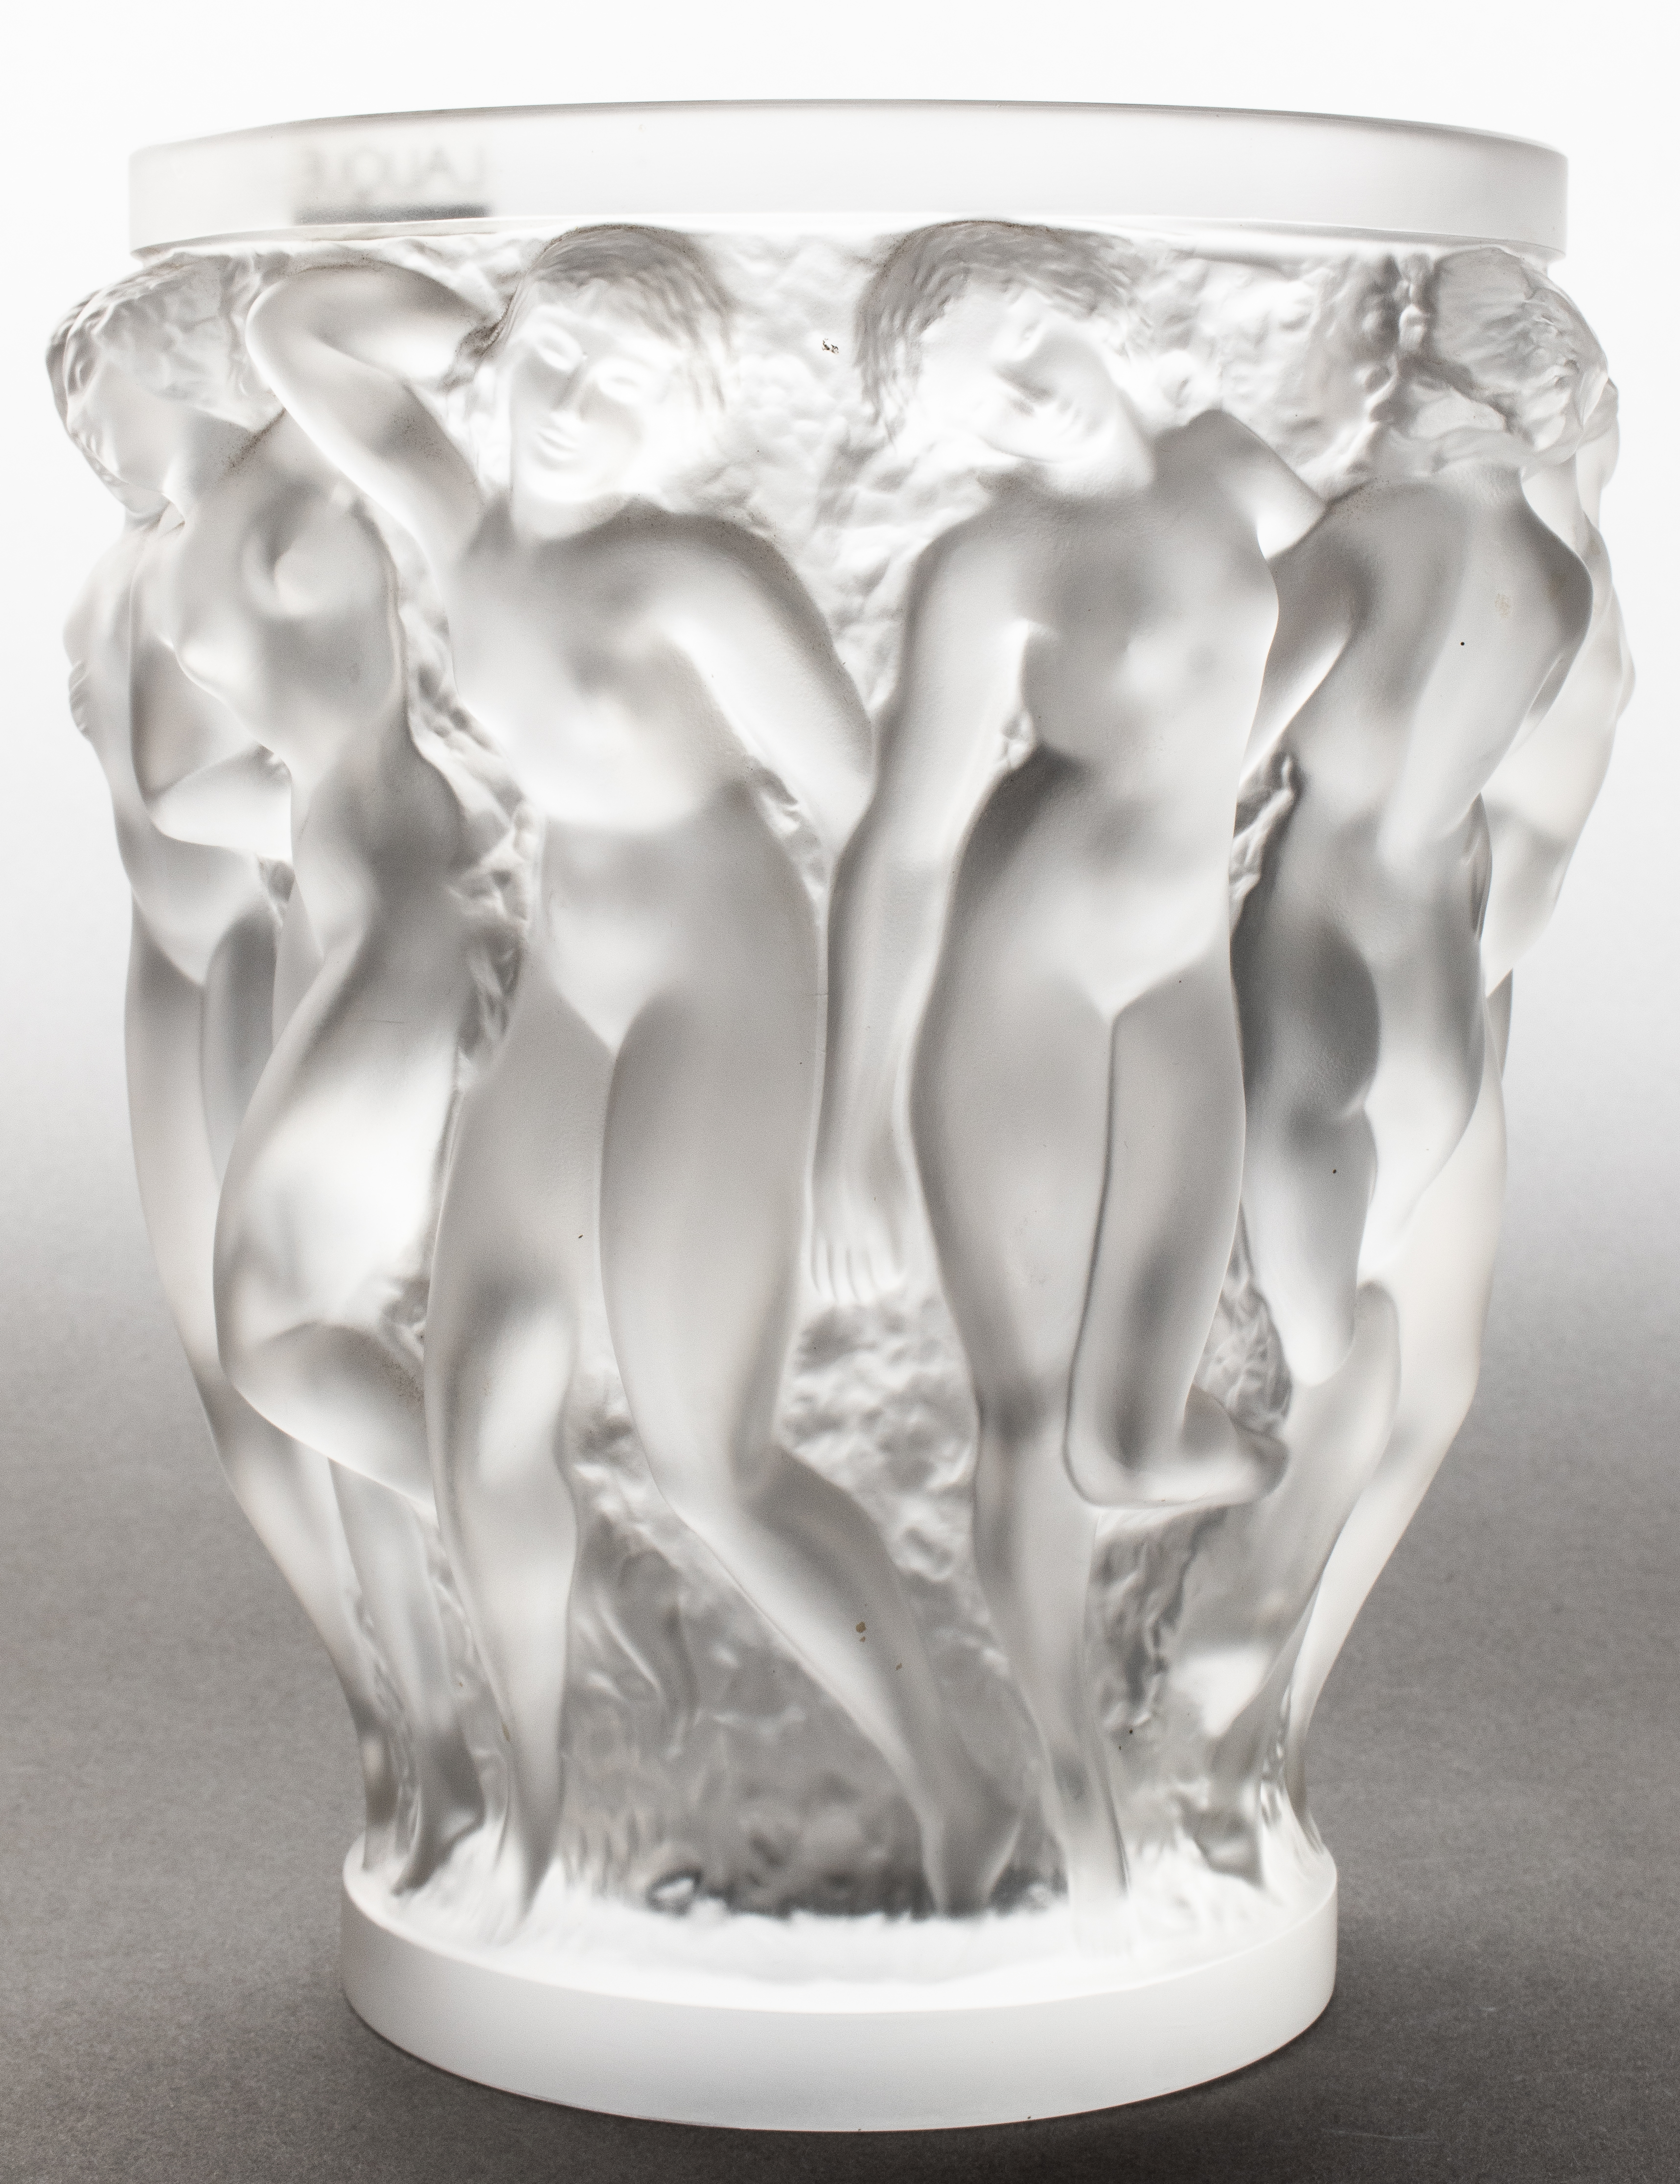 LALIQUE "BACCHANTES" LARGE FROSTED